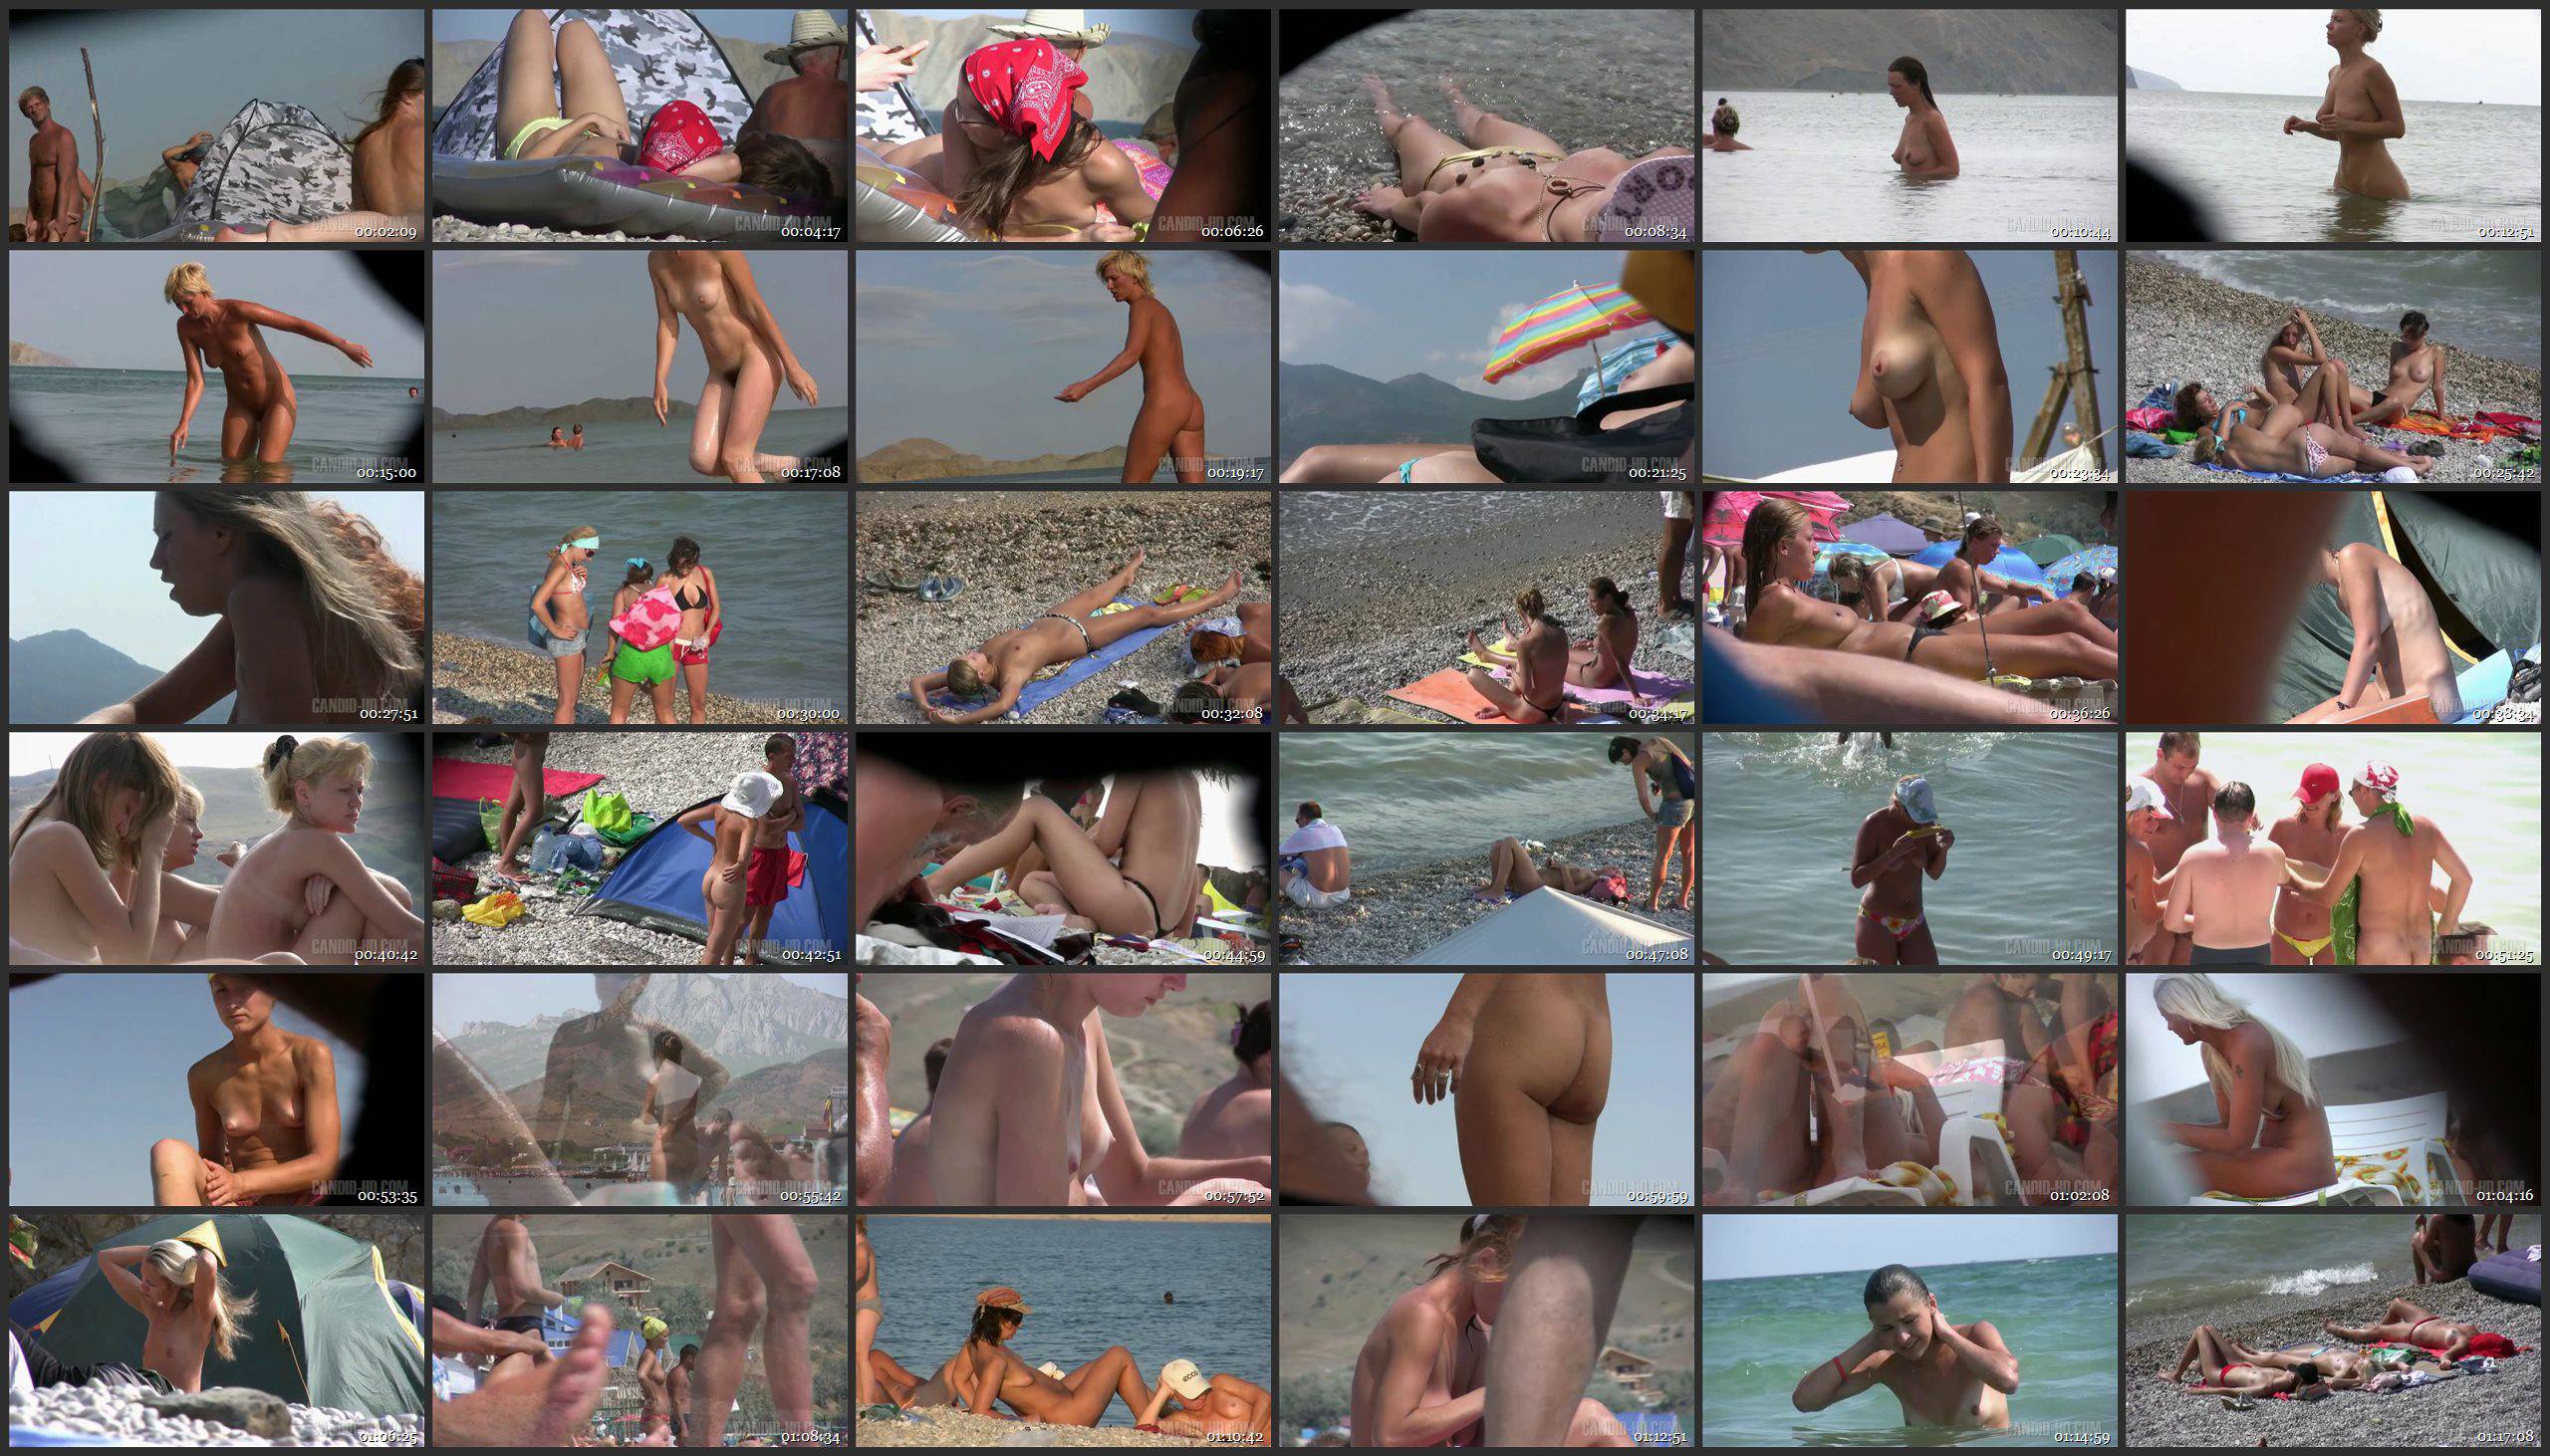 Candid-HD Videos-Sun Worshippers 2 - Thumbnails